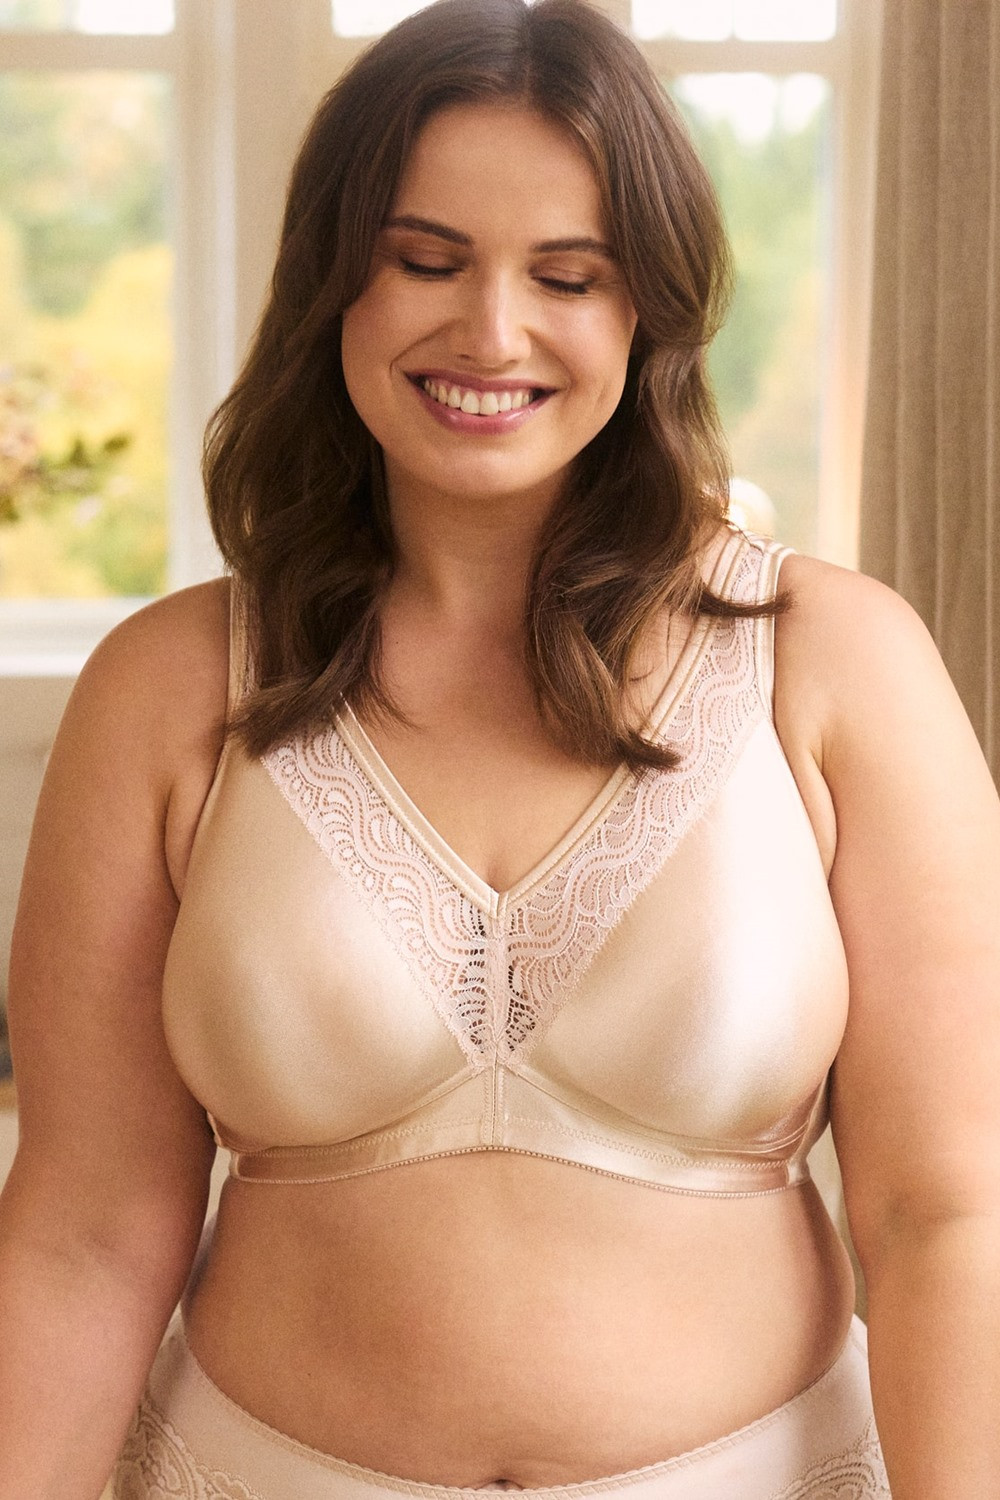 Smoothly bra – non-wired bra in soft microfibre – Miss Mary